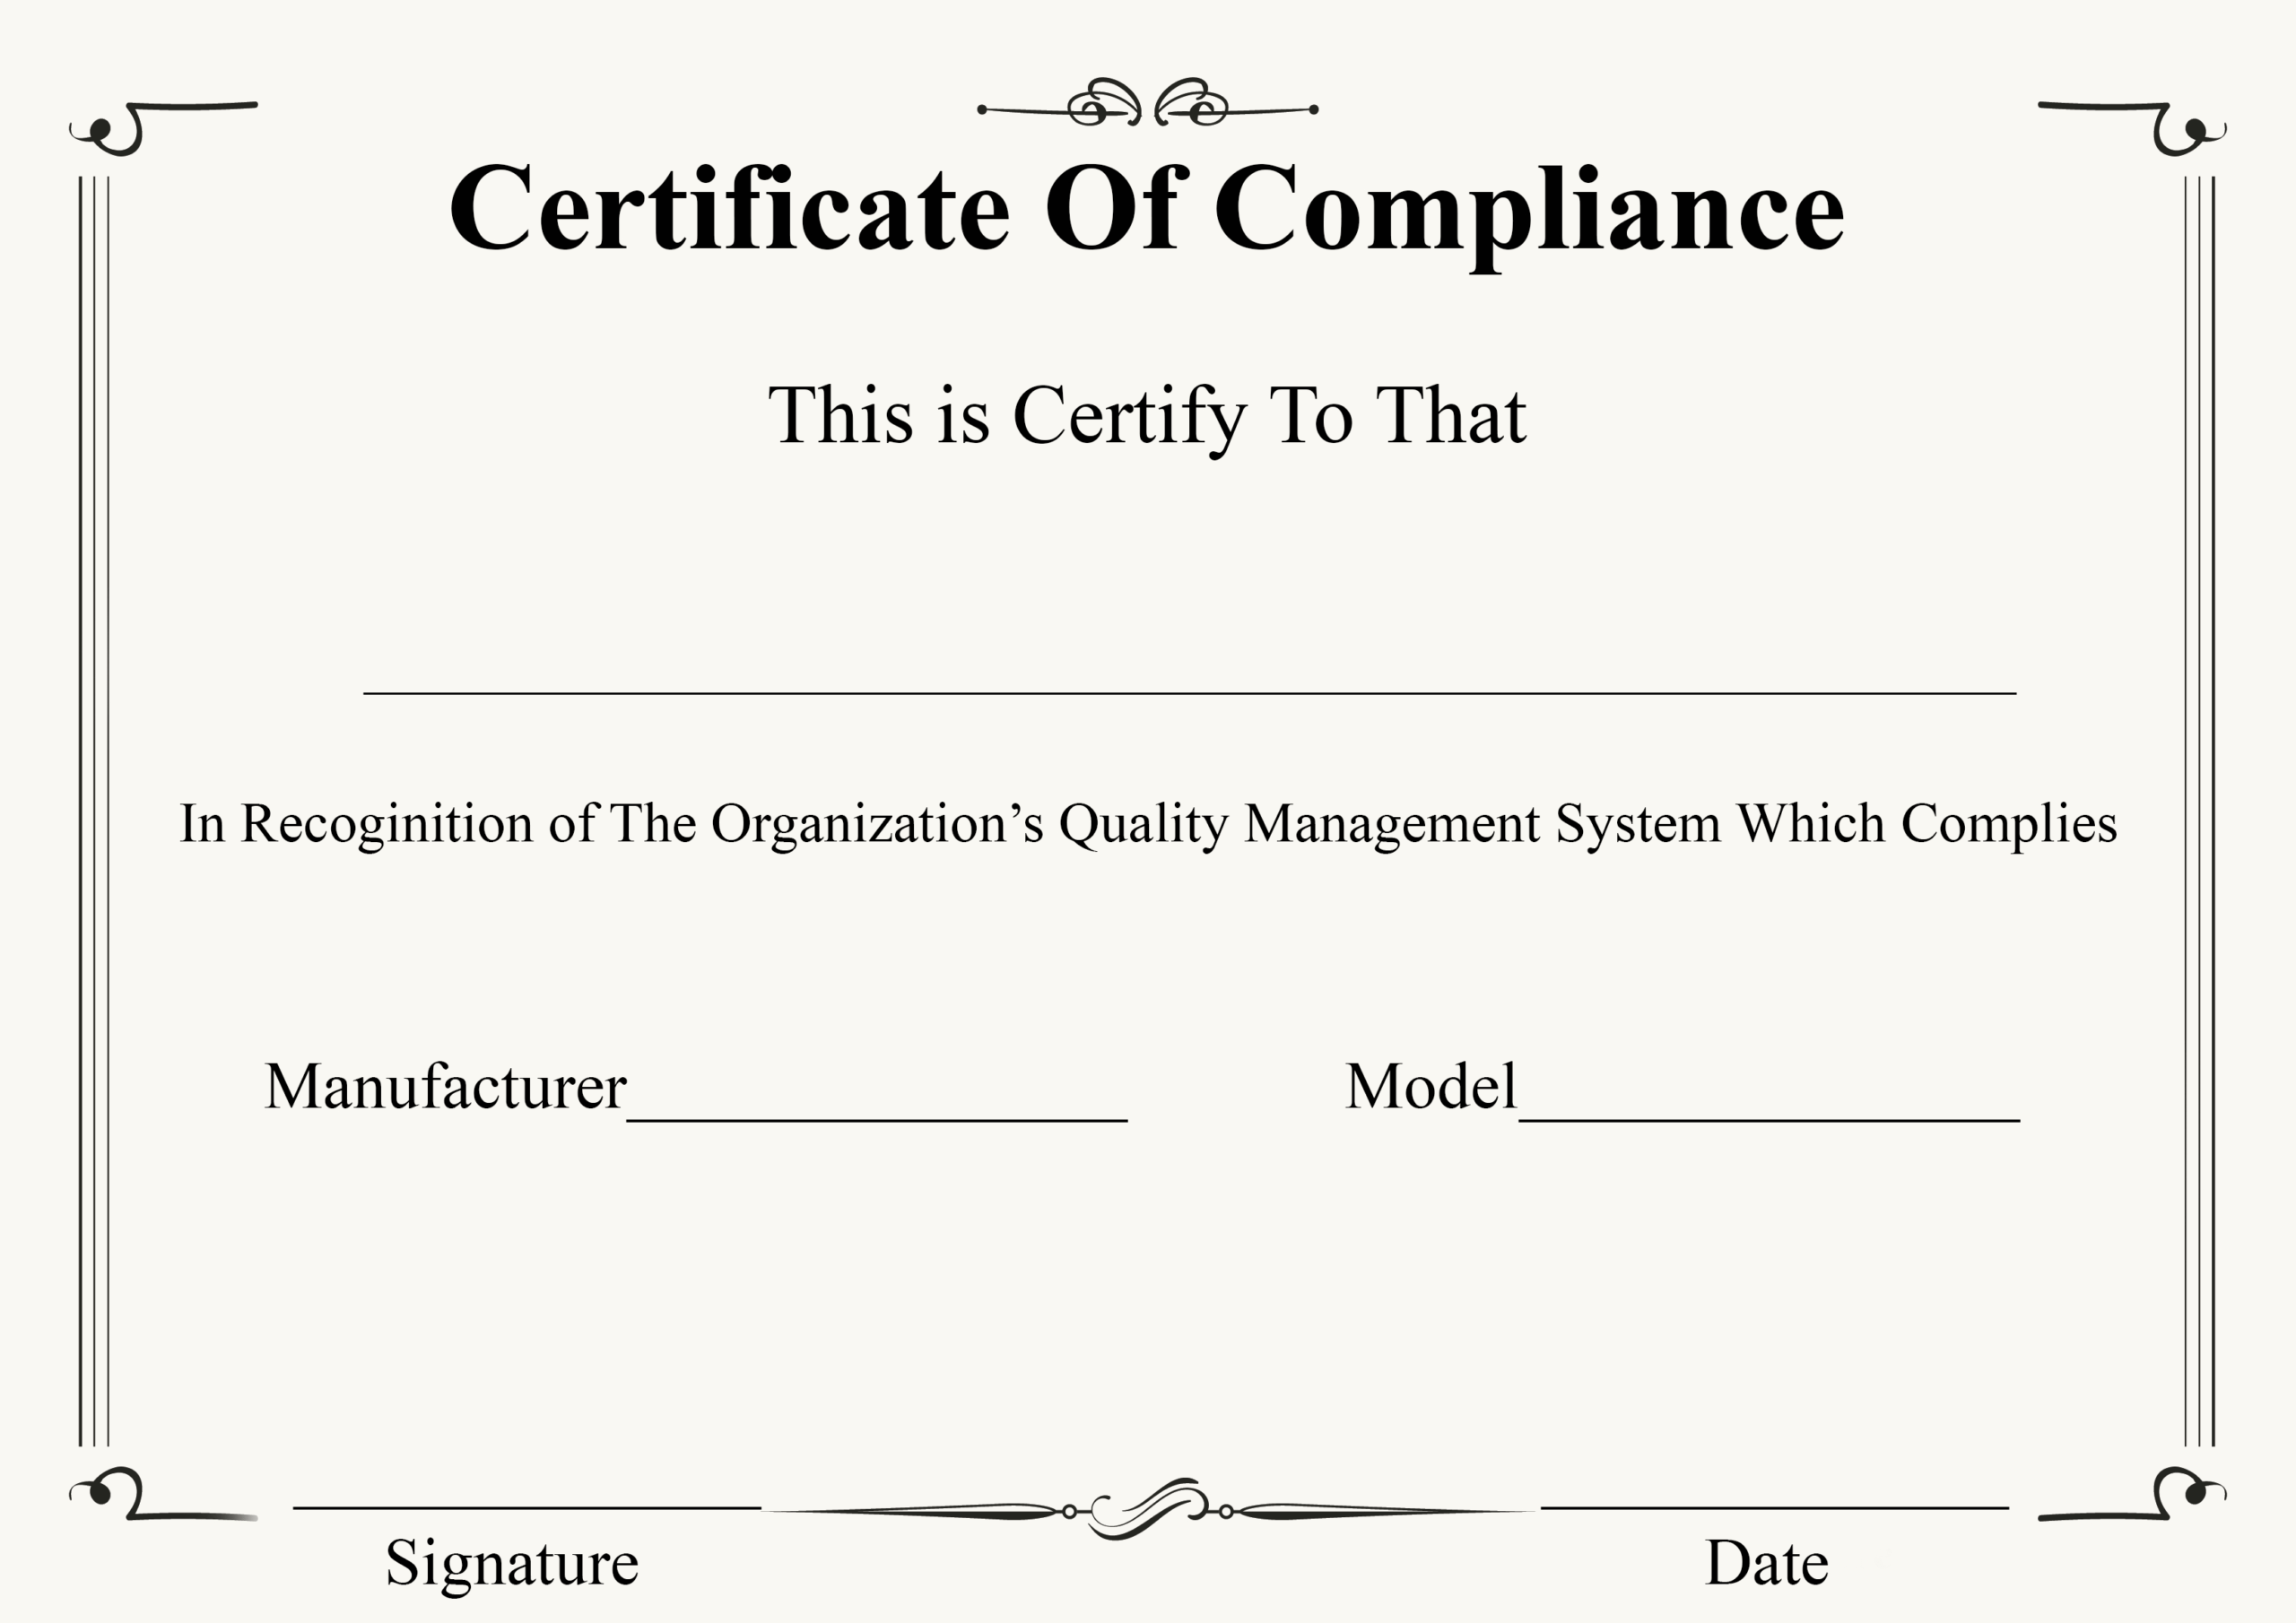 ❤️ Free Certificate Of Compliance Templates❤️ In Certificate Of Compliance Template